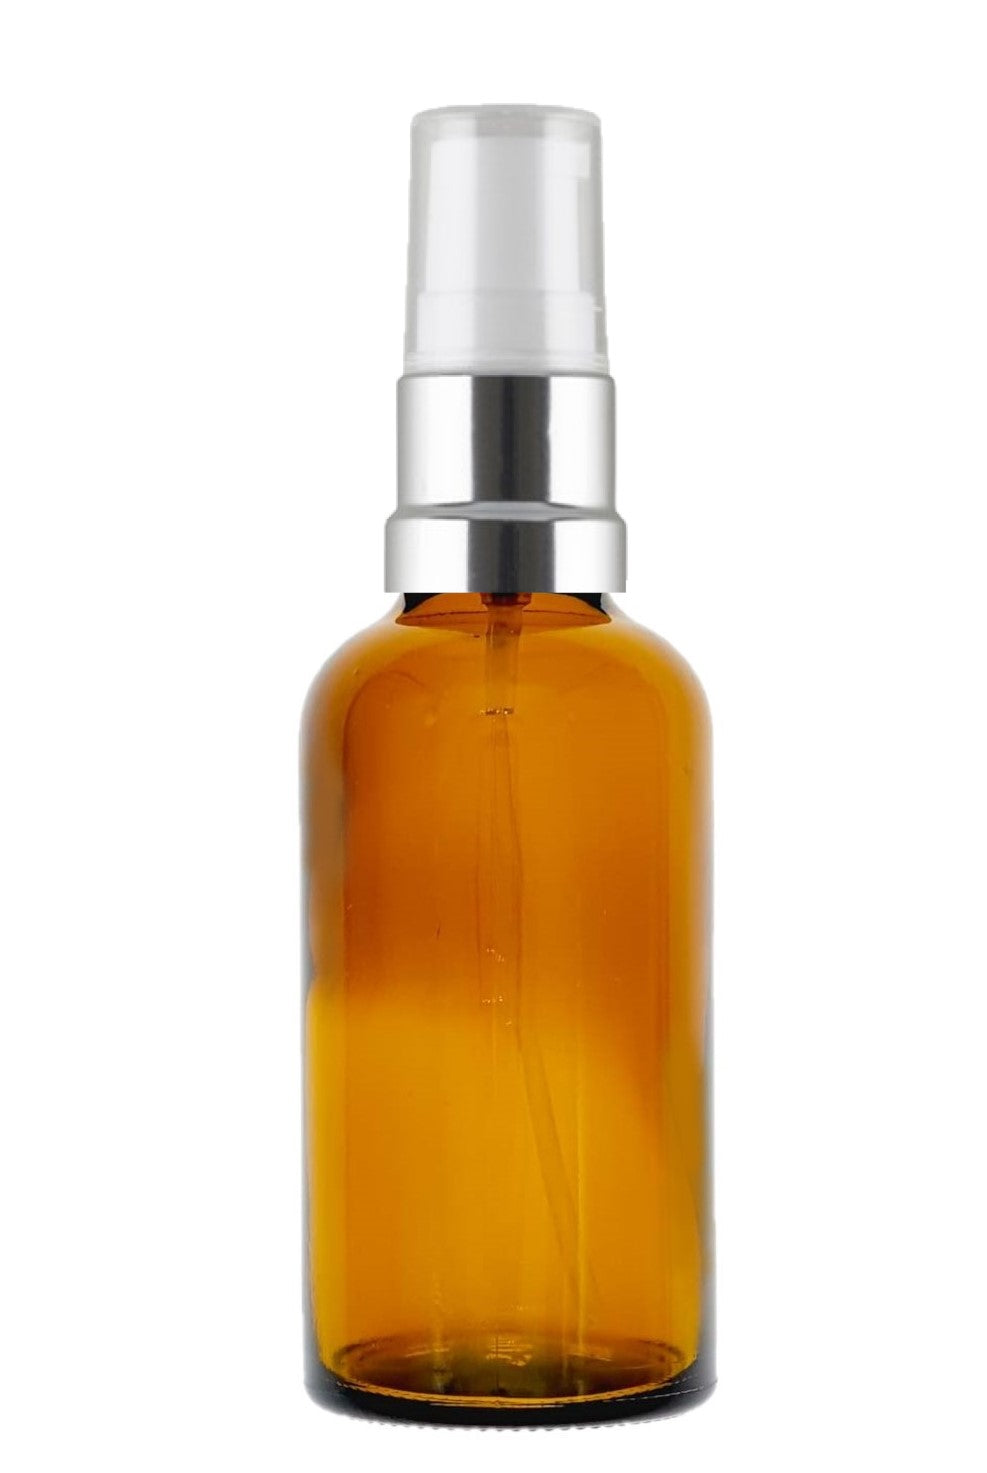 50ml Amber Glass Bottles with Silver/White Treatment Pump and Clear Overcap